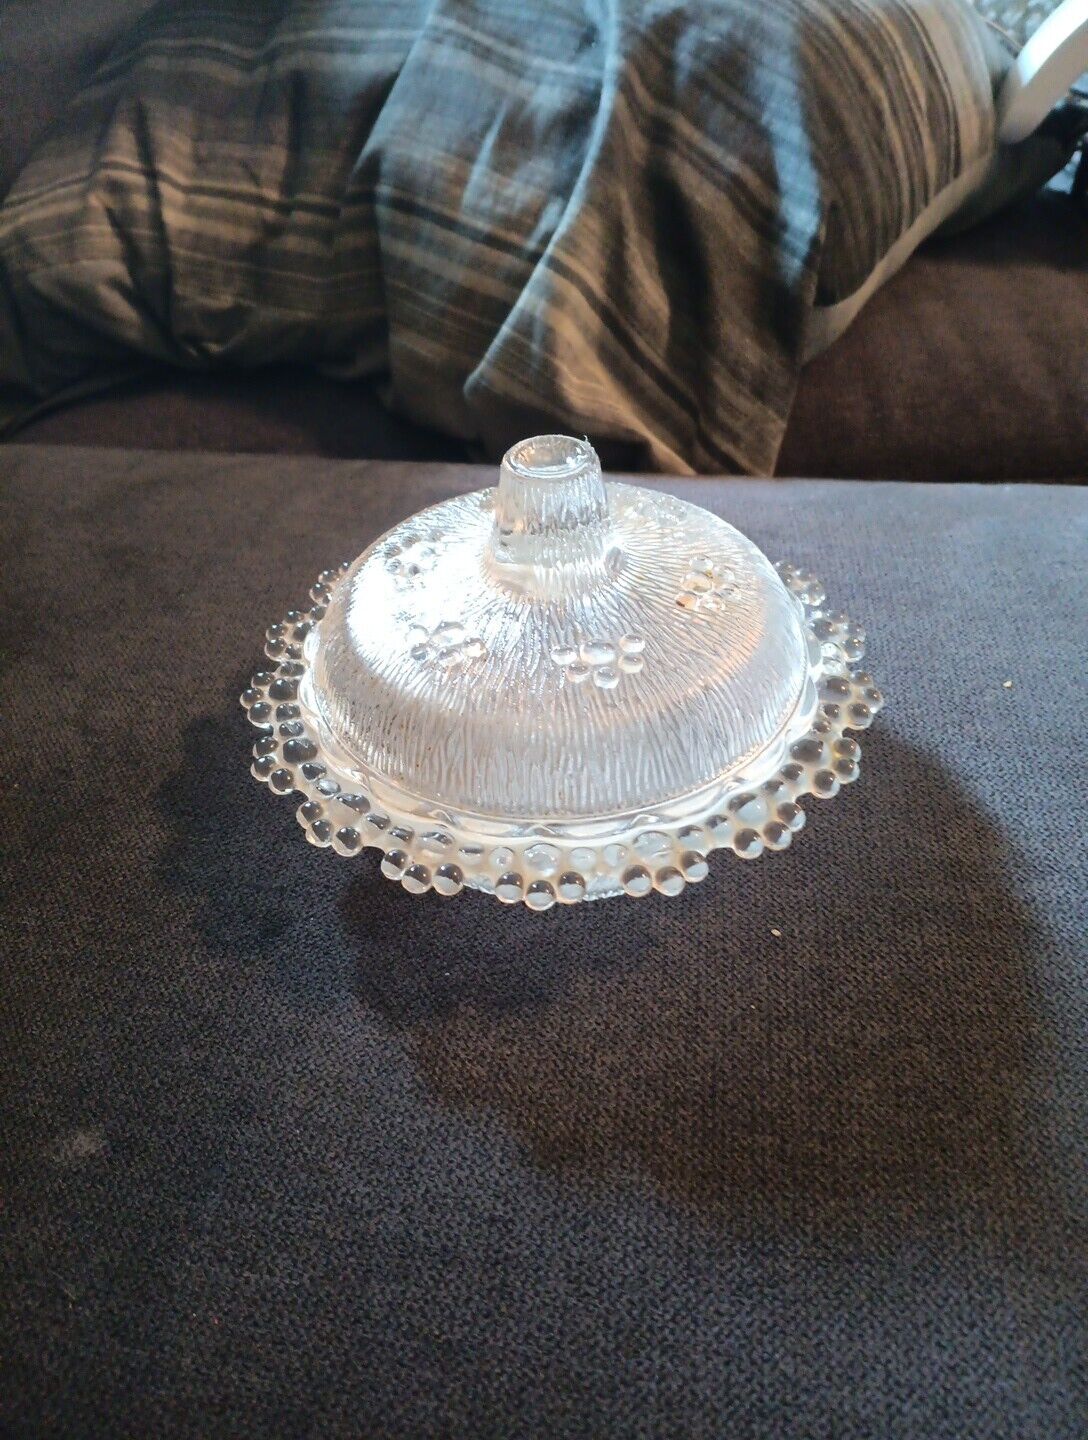 Vintage Italian Masserini Barocco Clear Glass Sugar Bowl With Lid Made In Italy